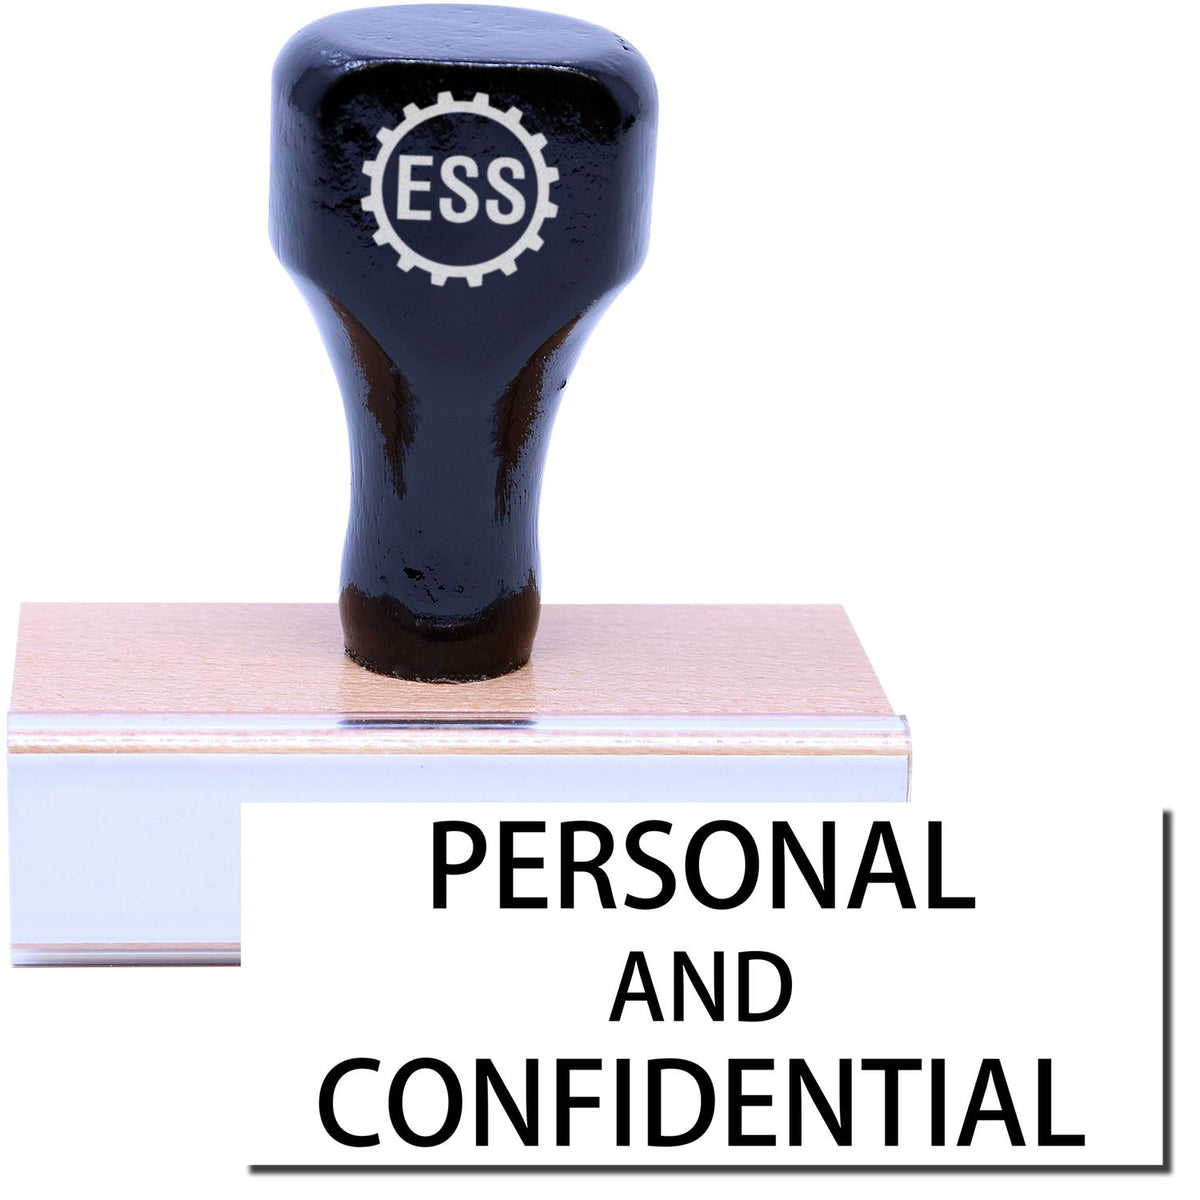 A stock office rubber stamp with a stamped image showing how the text &quot;PERSONAL AND CONFIDENTIAL&quot; is displayed after stamping.